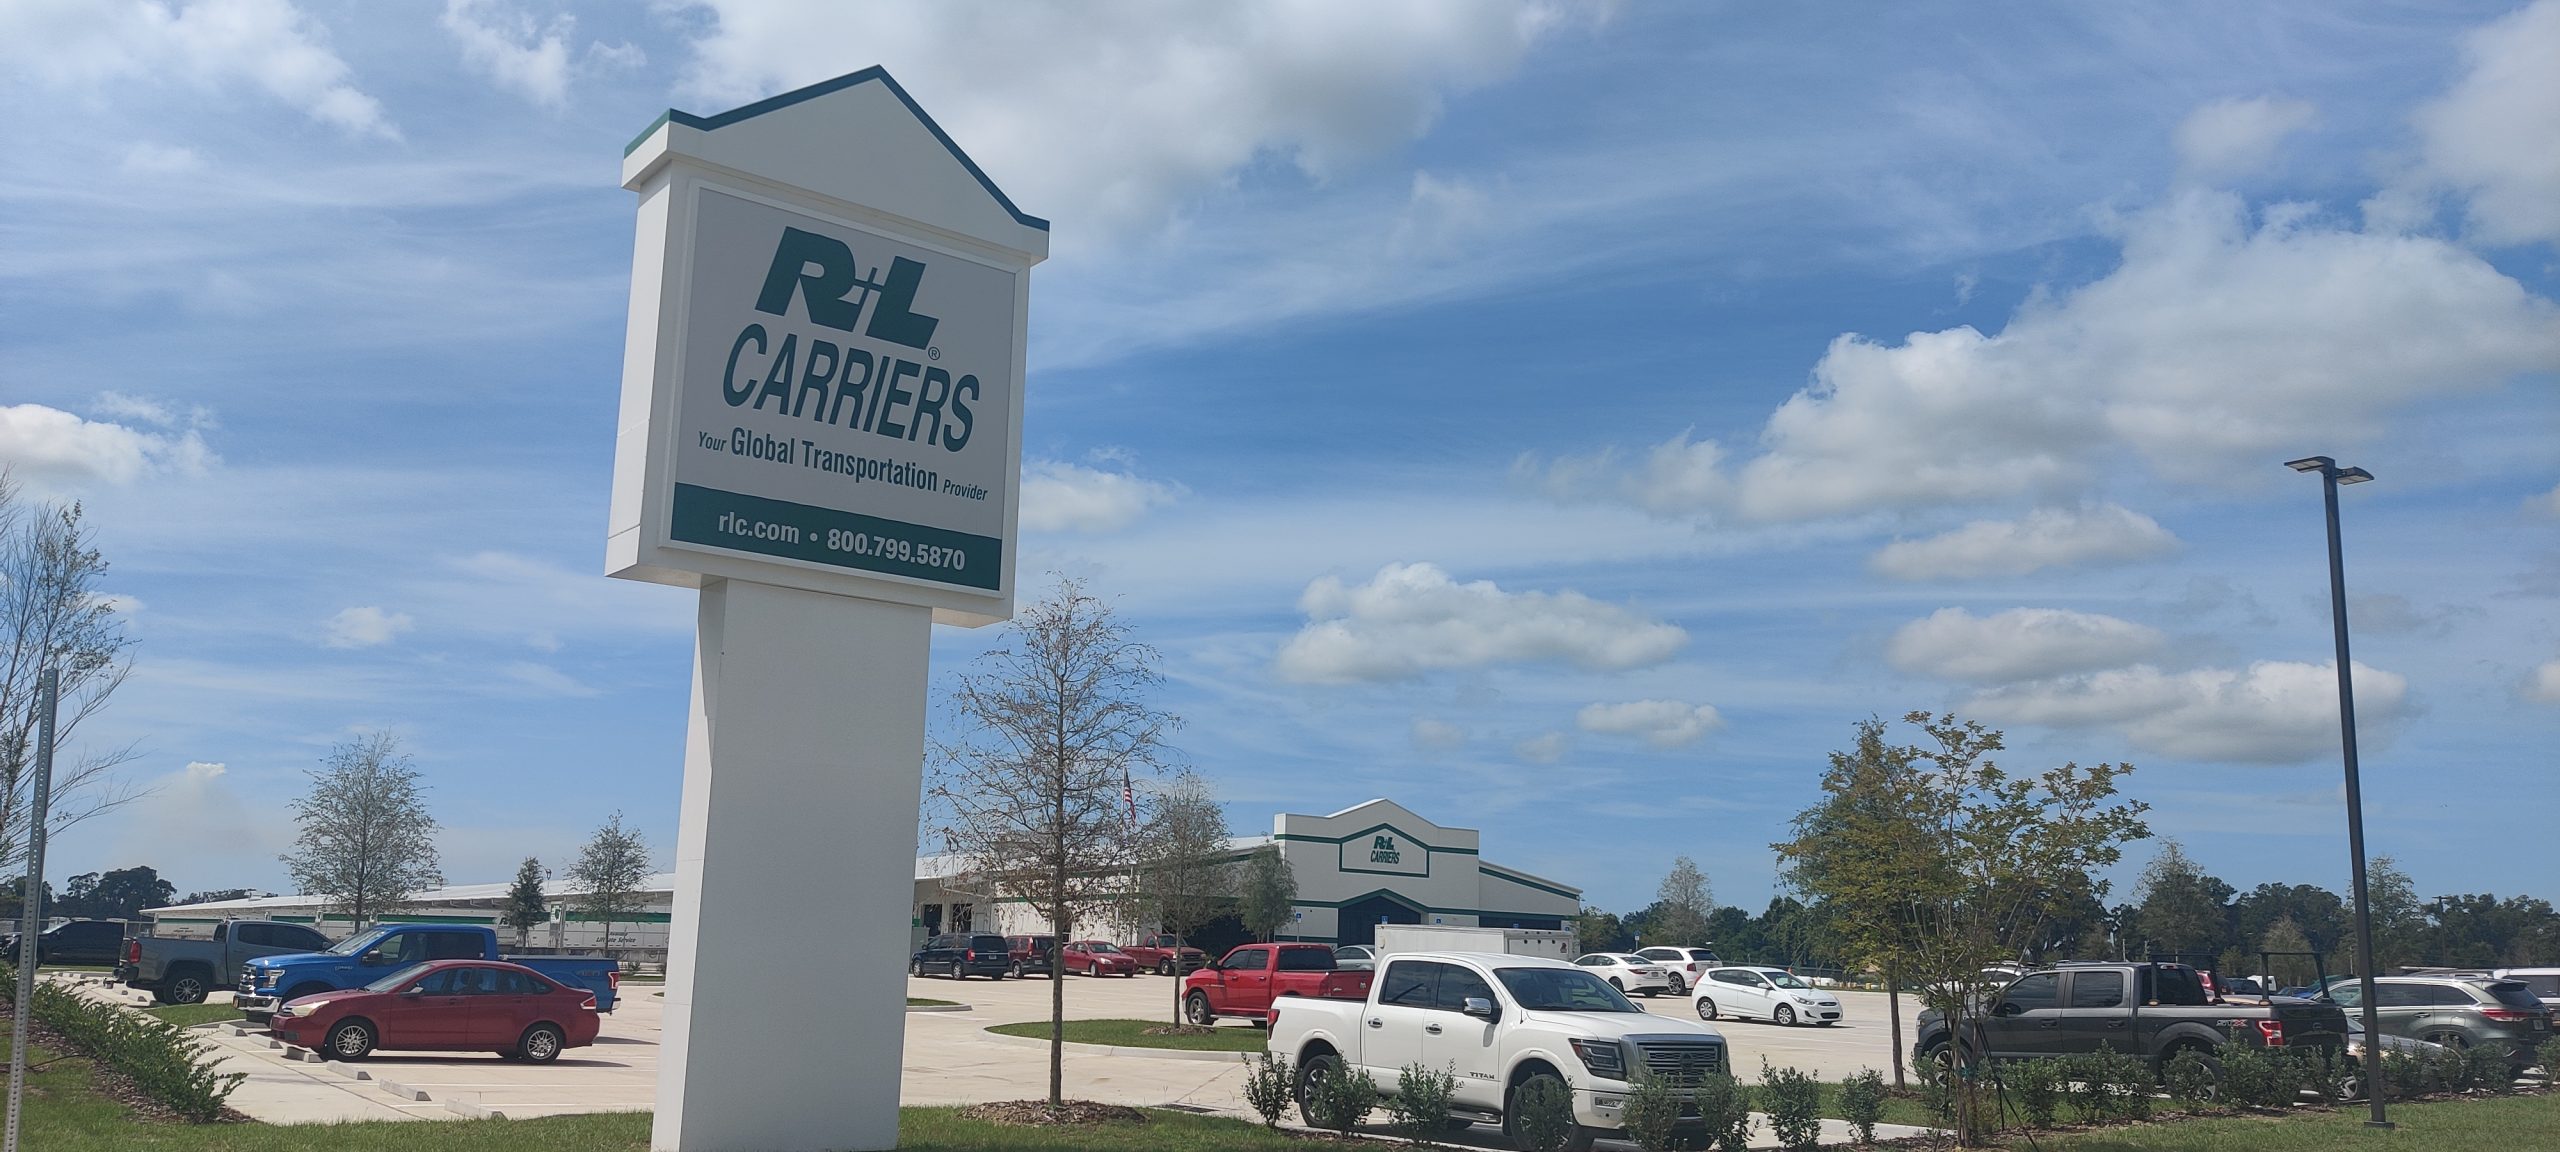 09-05-2023 R&L Carriers - New Office